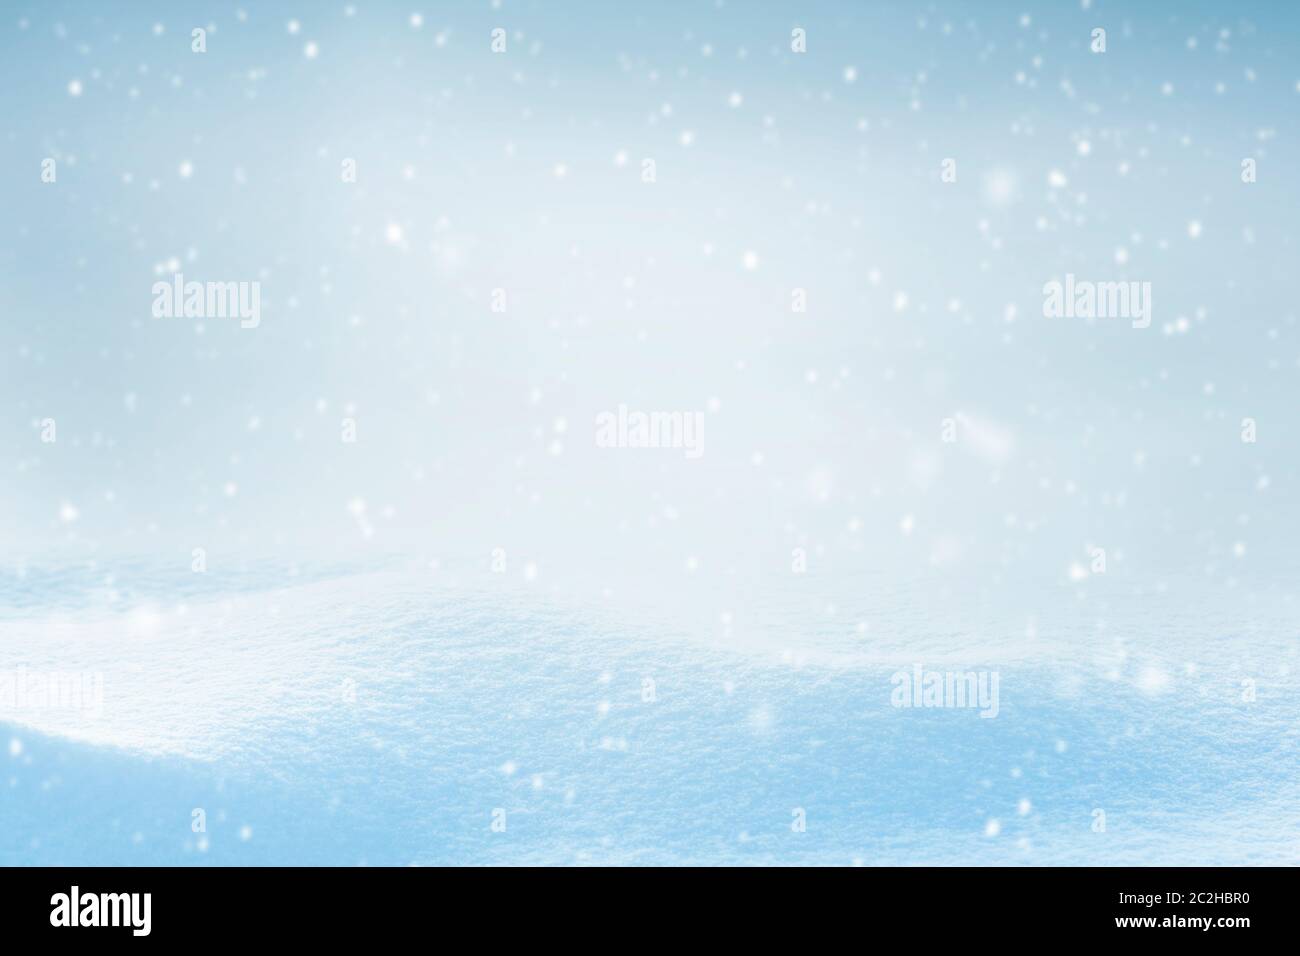 winter background with snowflakes Stock Photo